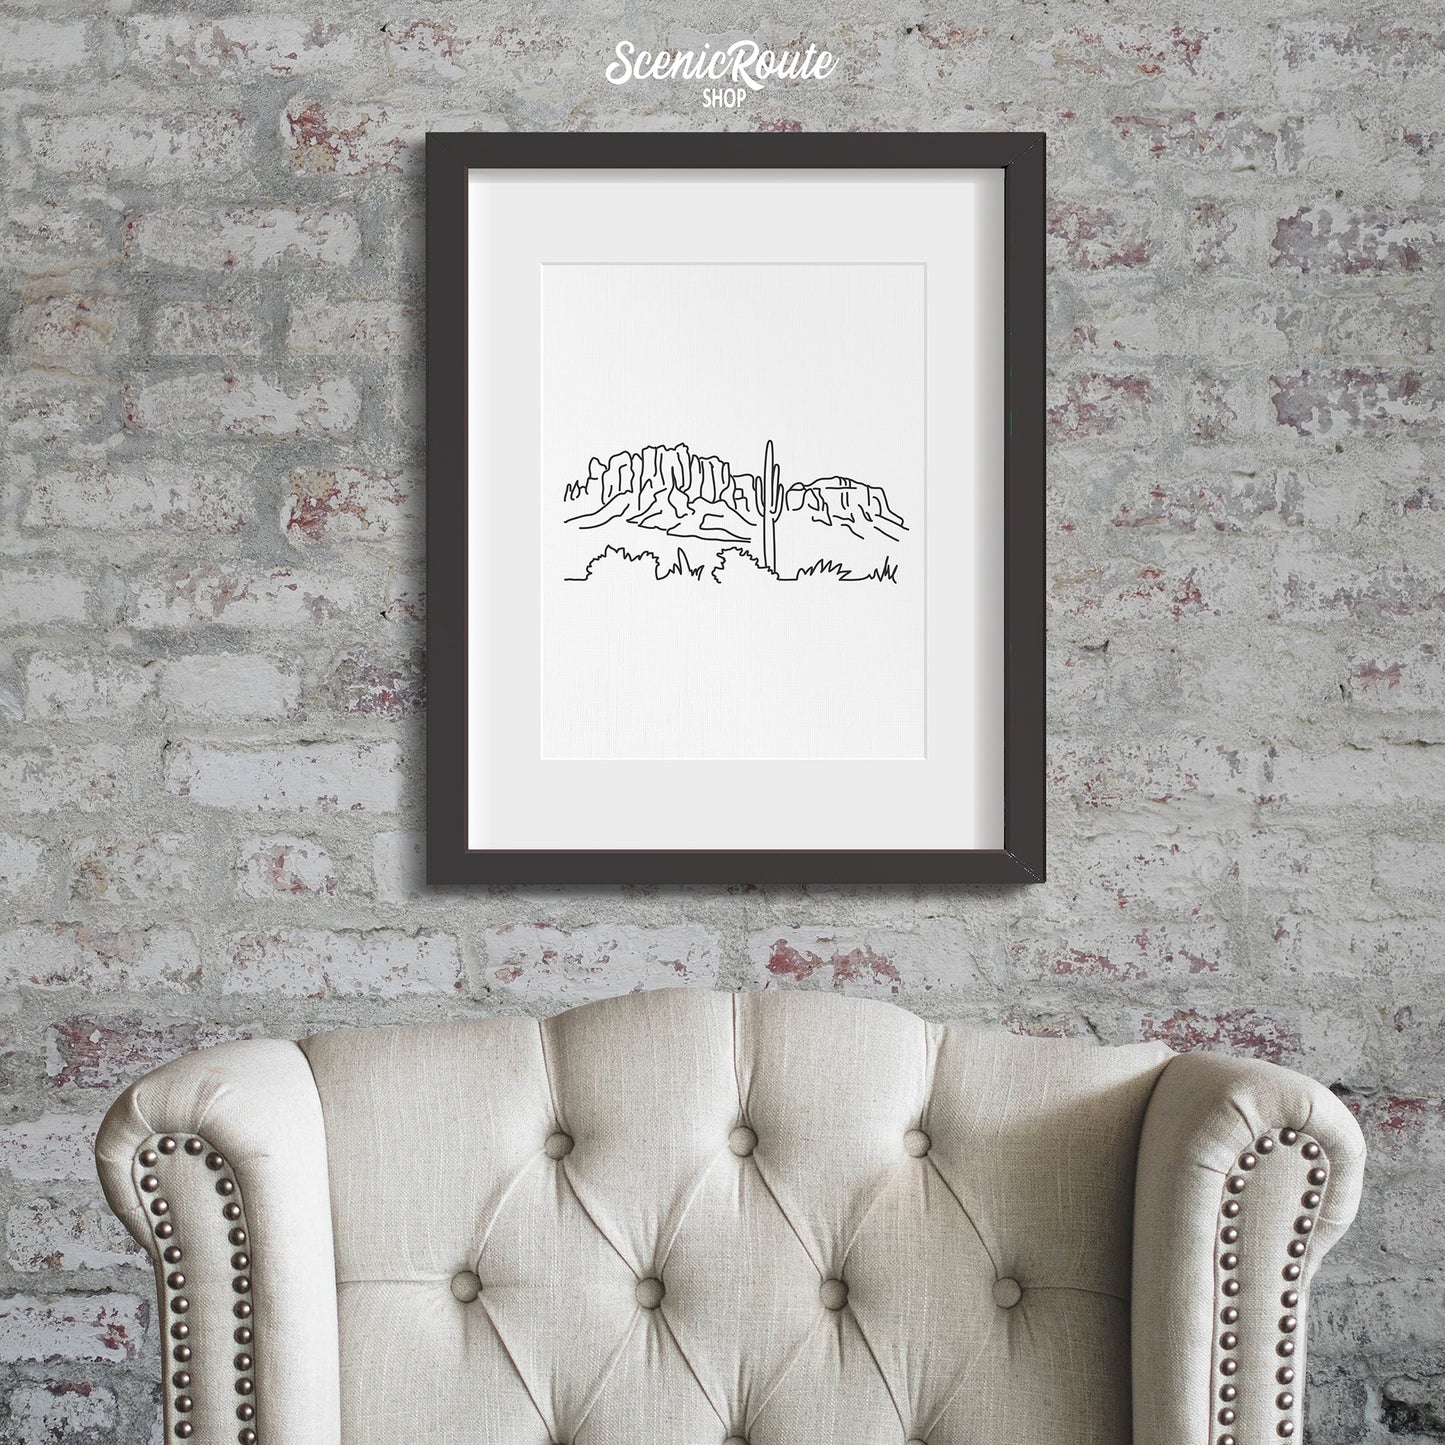 A framed line art drawing of Superstition Mountains hung above a chair